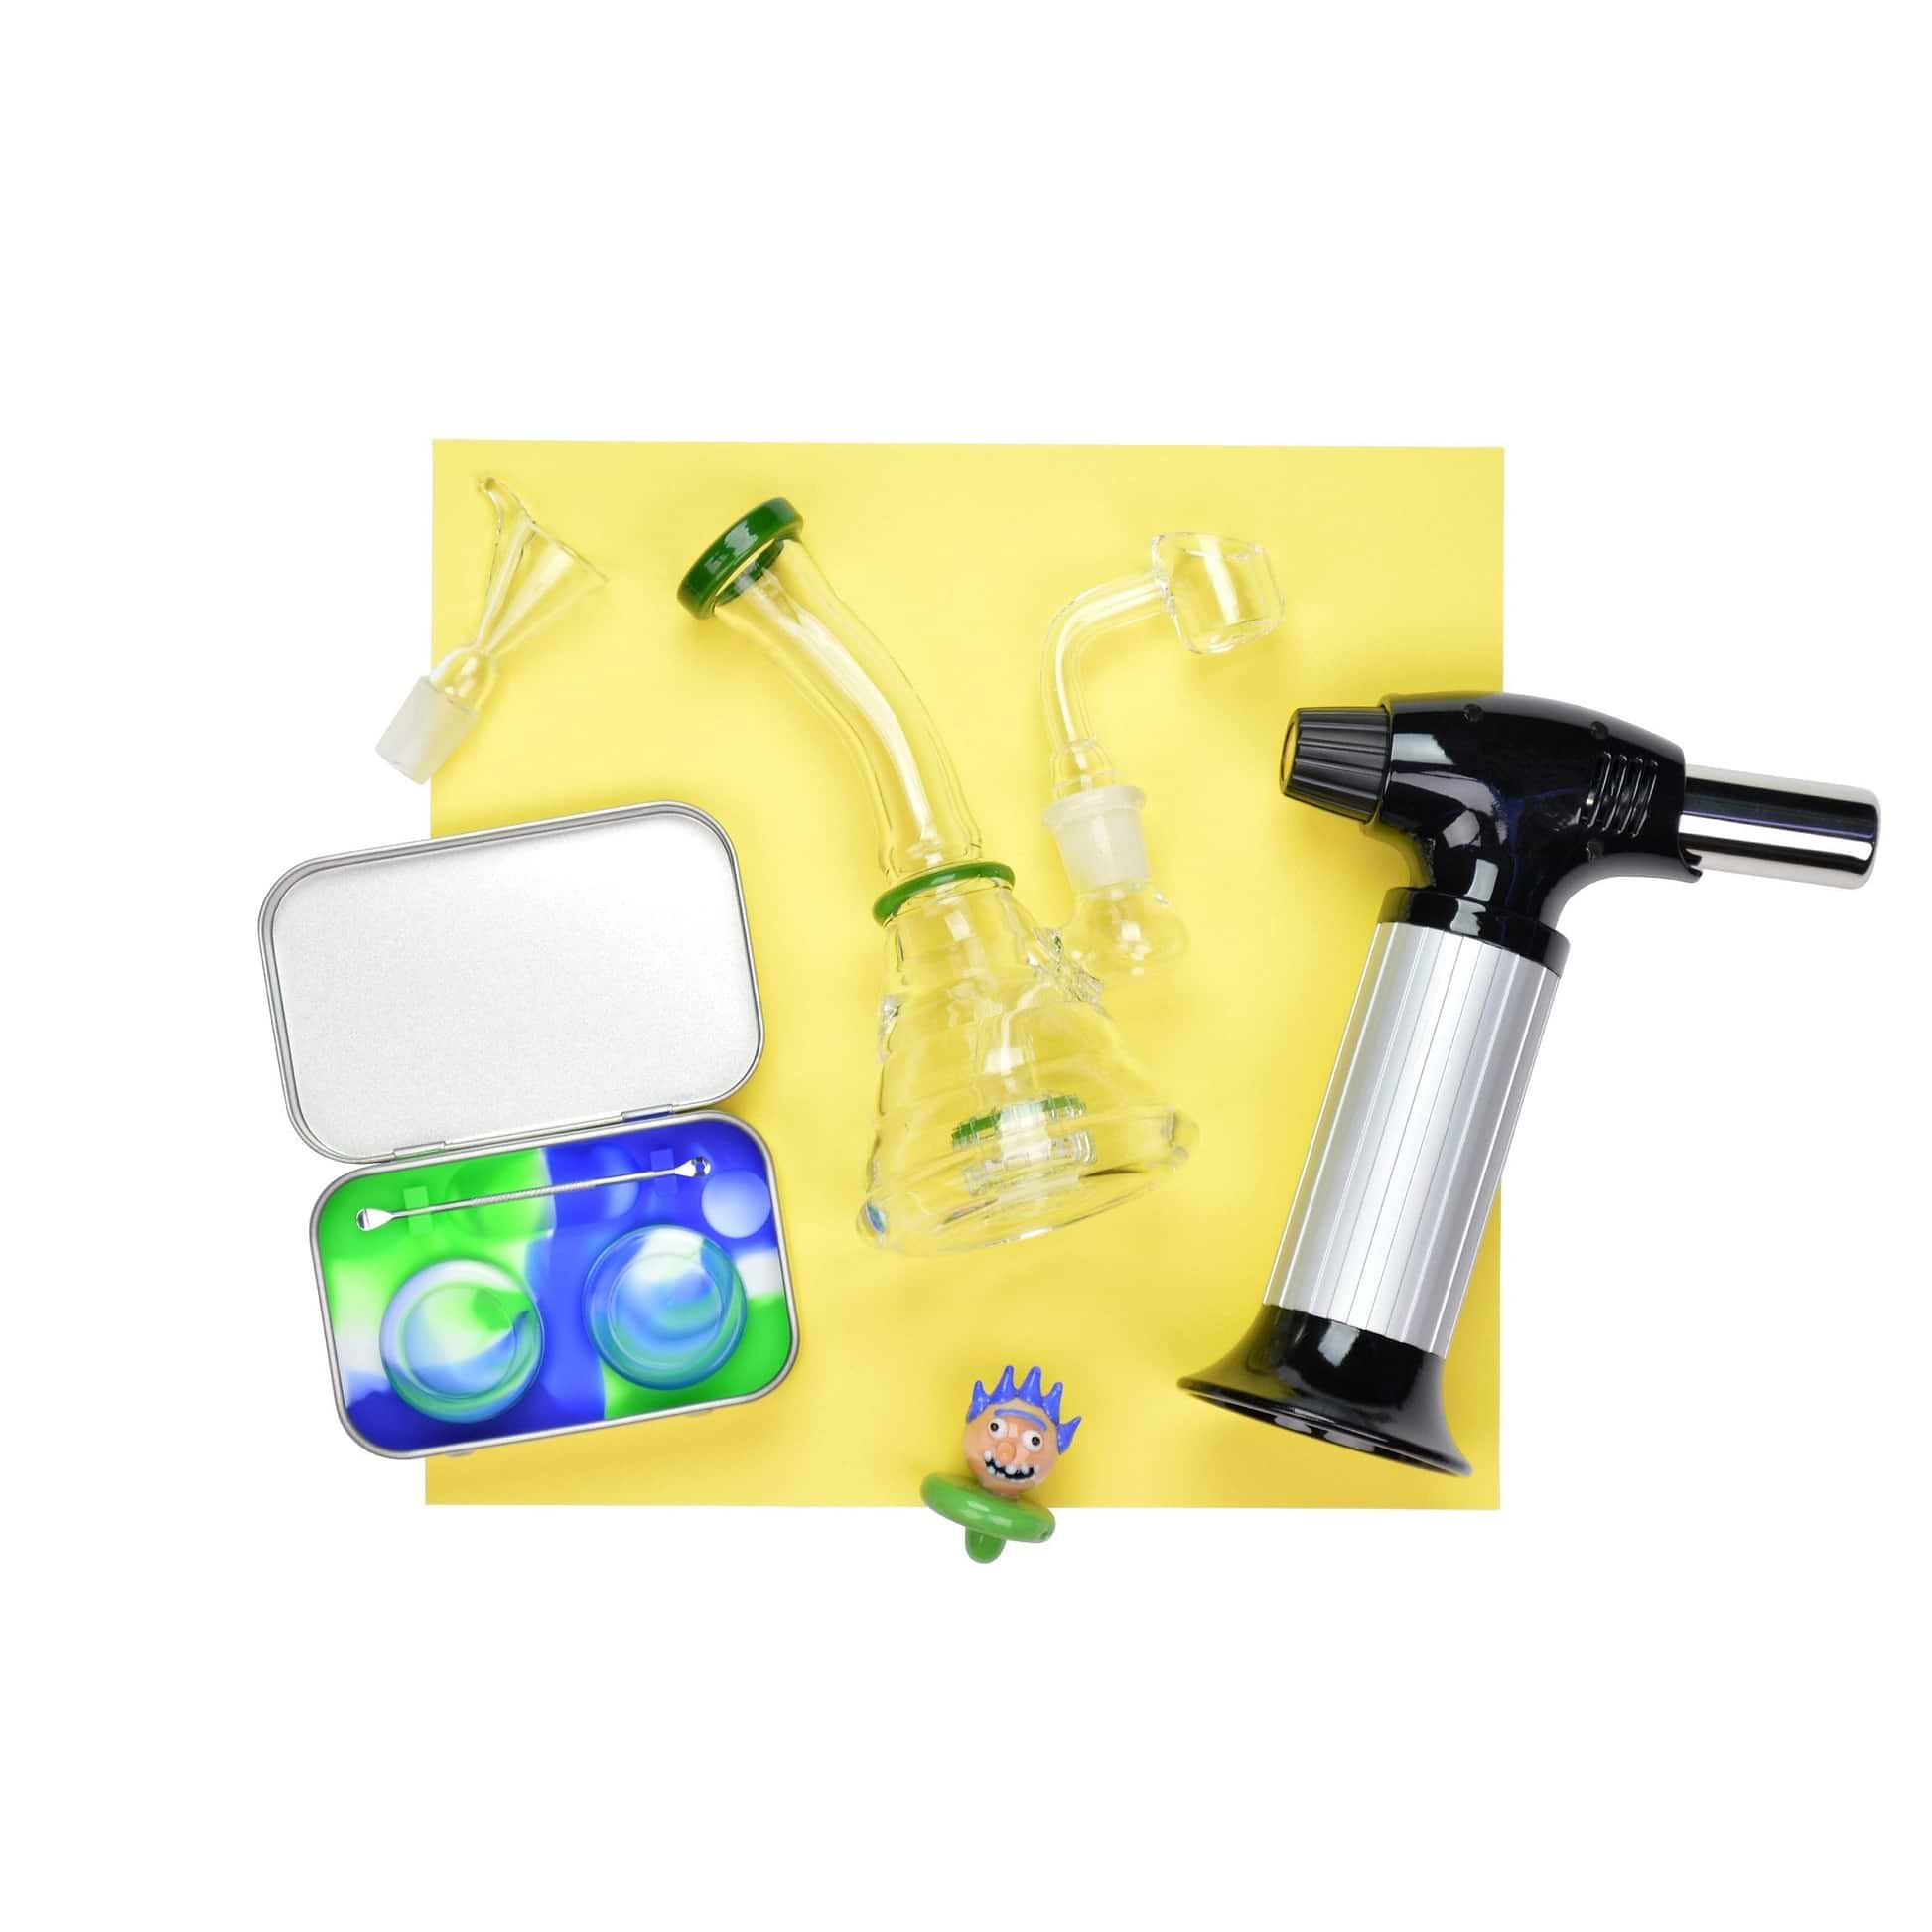 Set of mini bong with bowl and quartz banger, swirl-colored wax containers kit, head styled carb cap and torch lighter